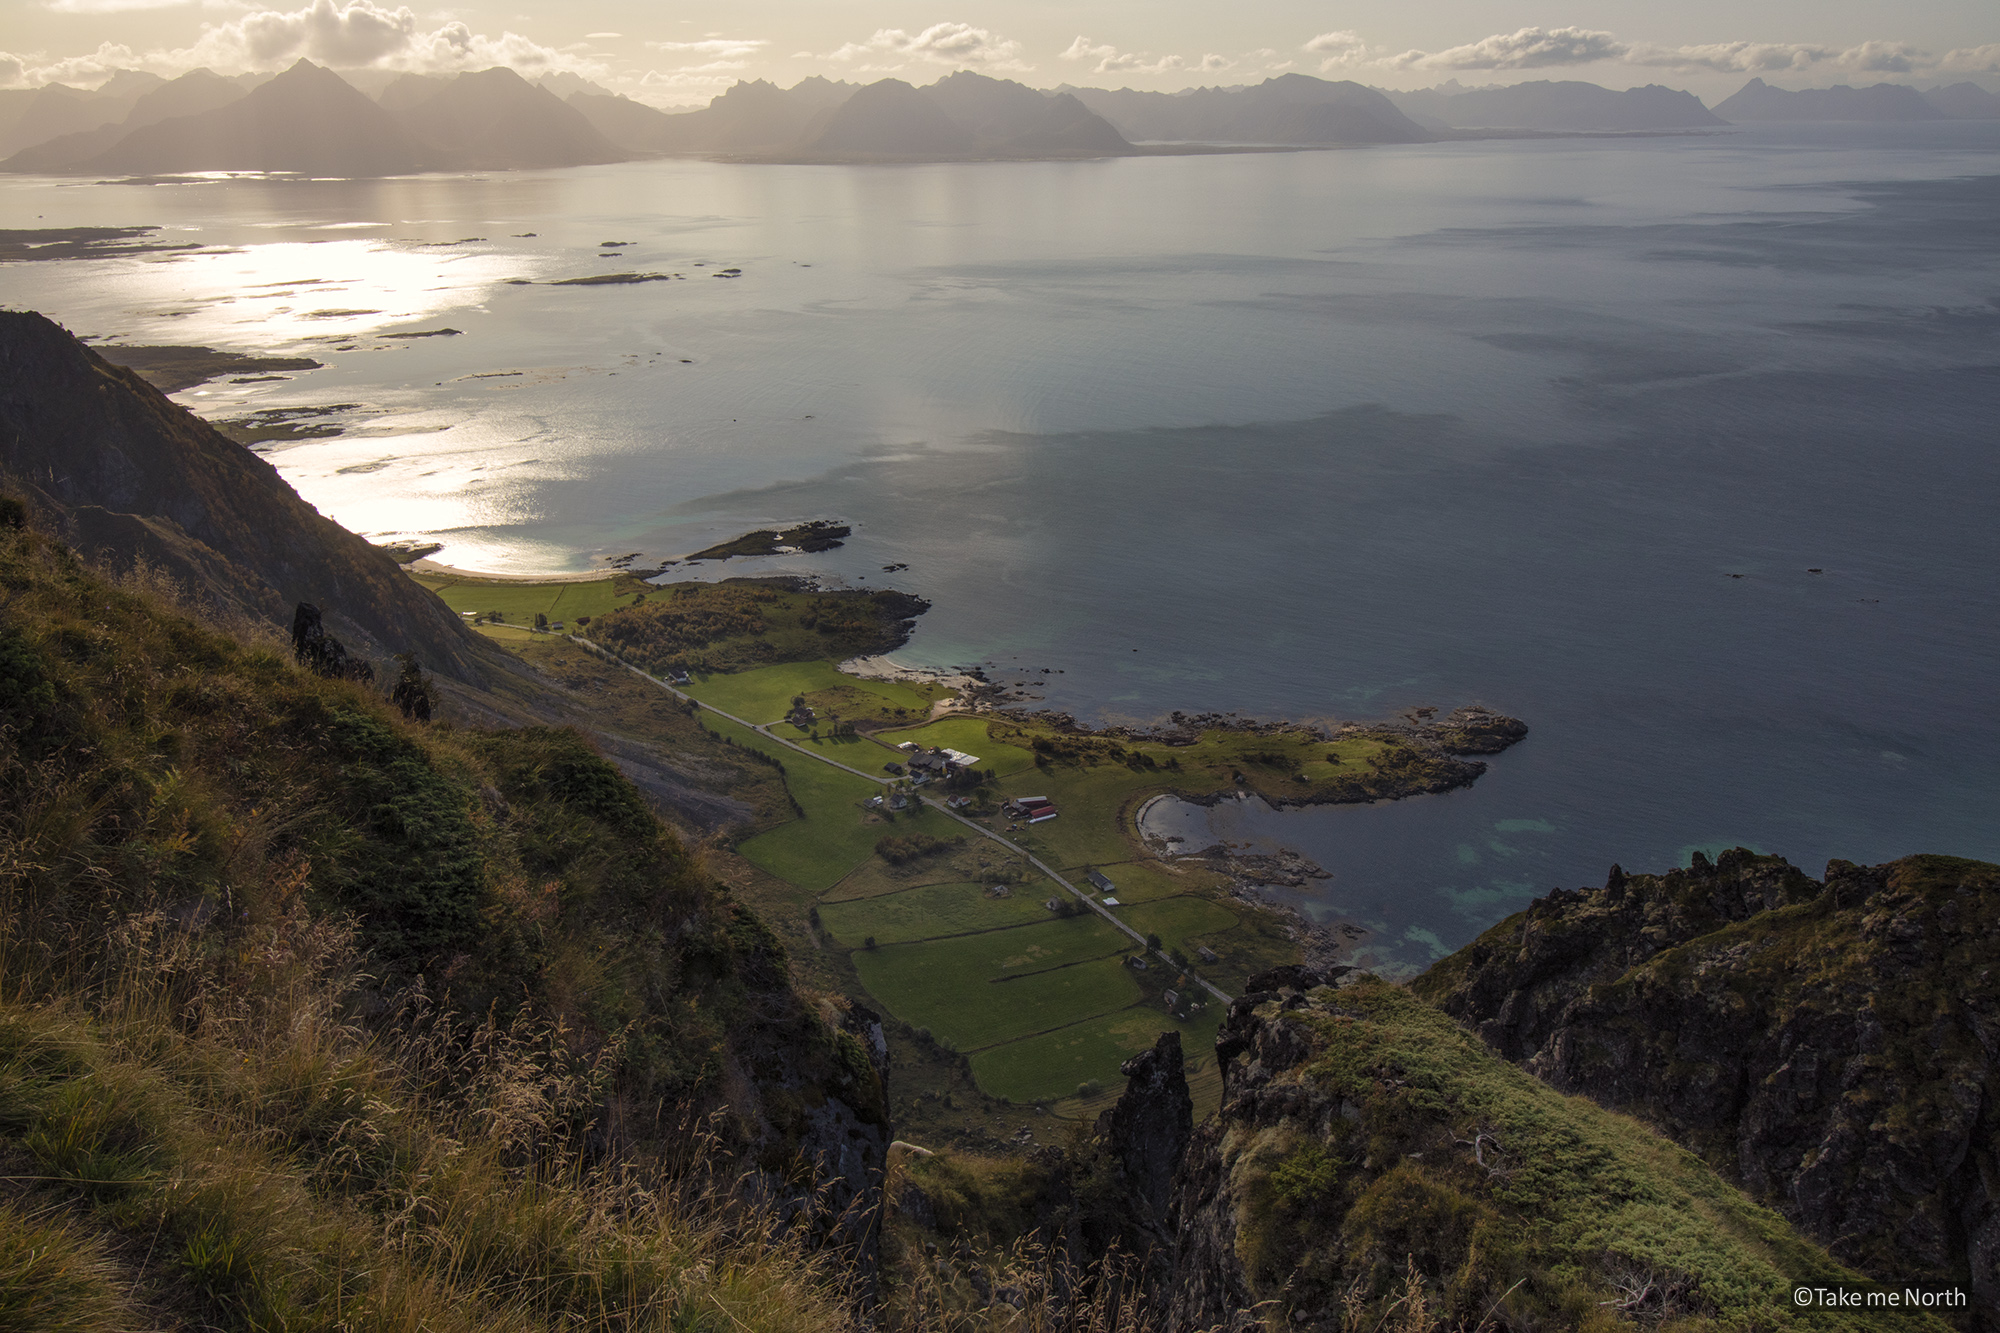 The view from Tanipa, Hadseløya, with the Lofoten in the background.